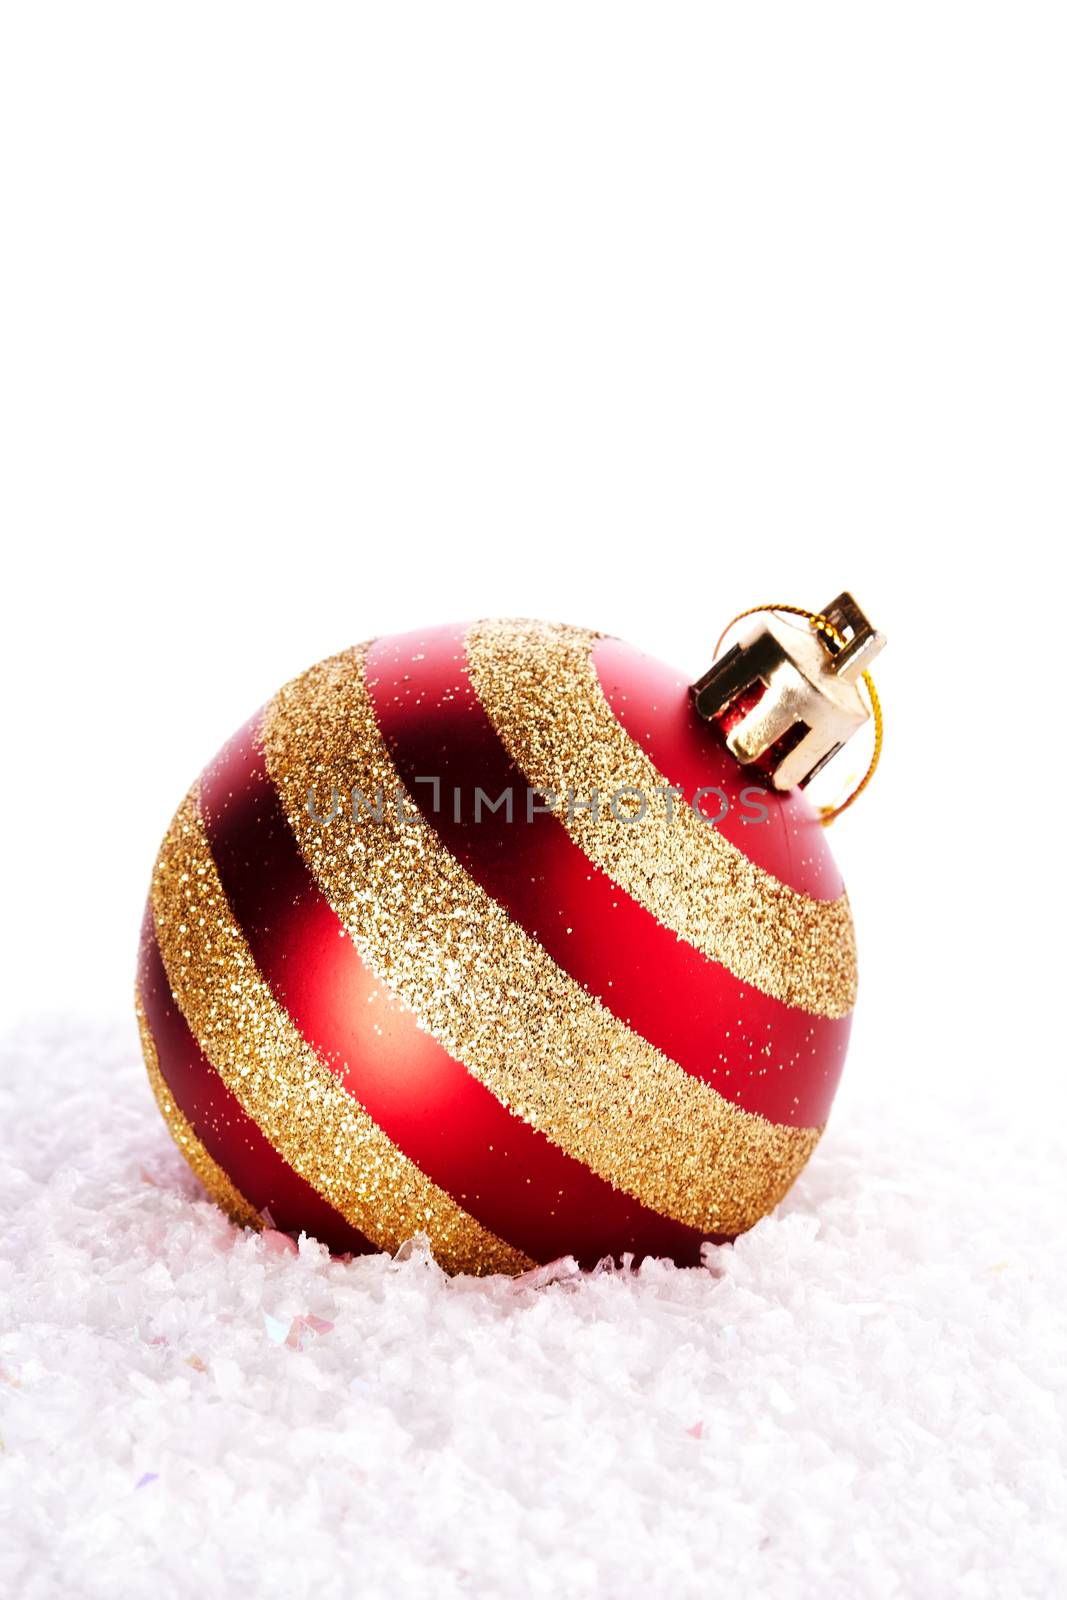 New Year's striped ball on snow. New Year's red ball. Christmas ball. Christmas tree decorations. Christmas jewelry.